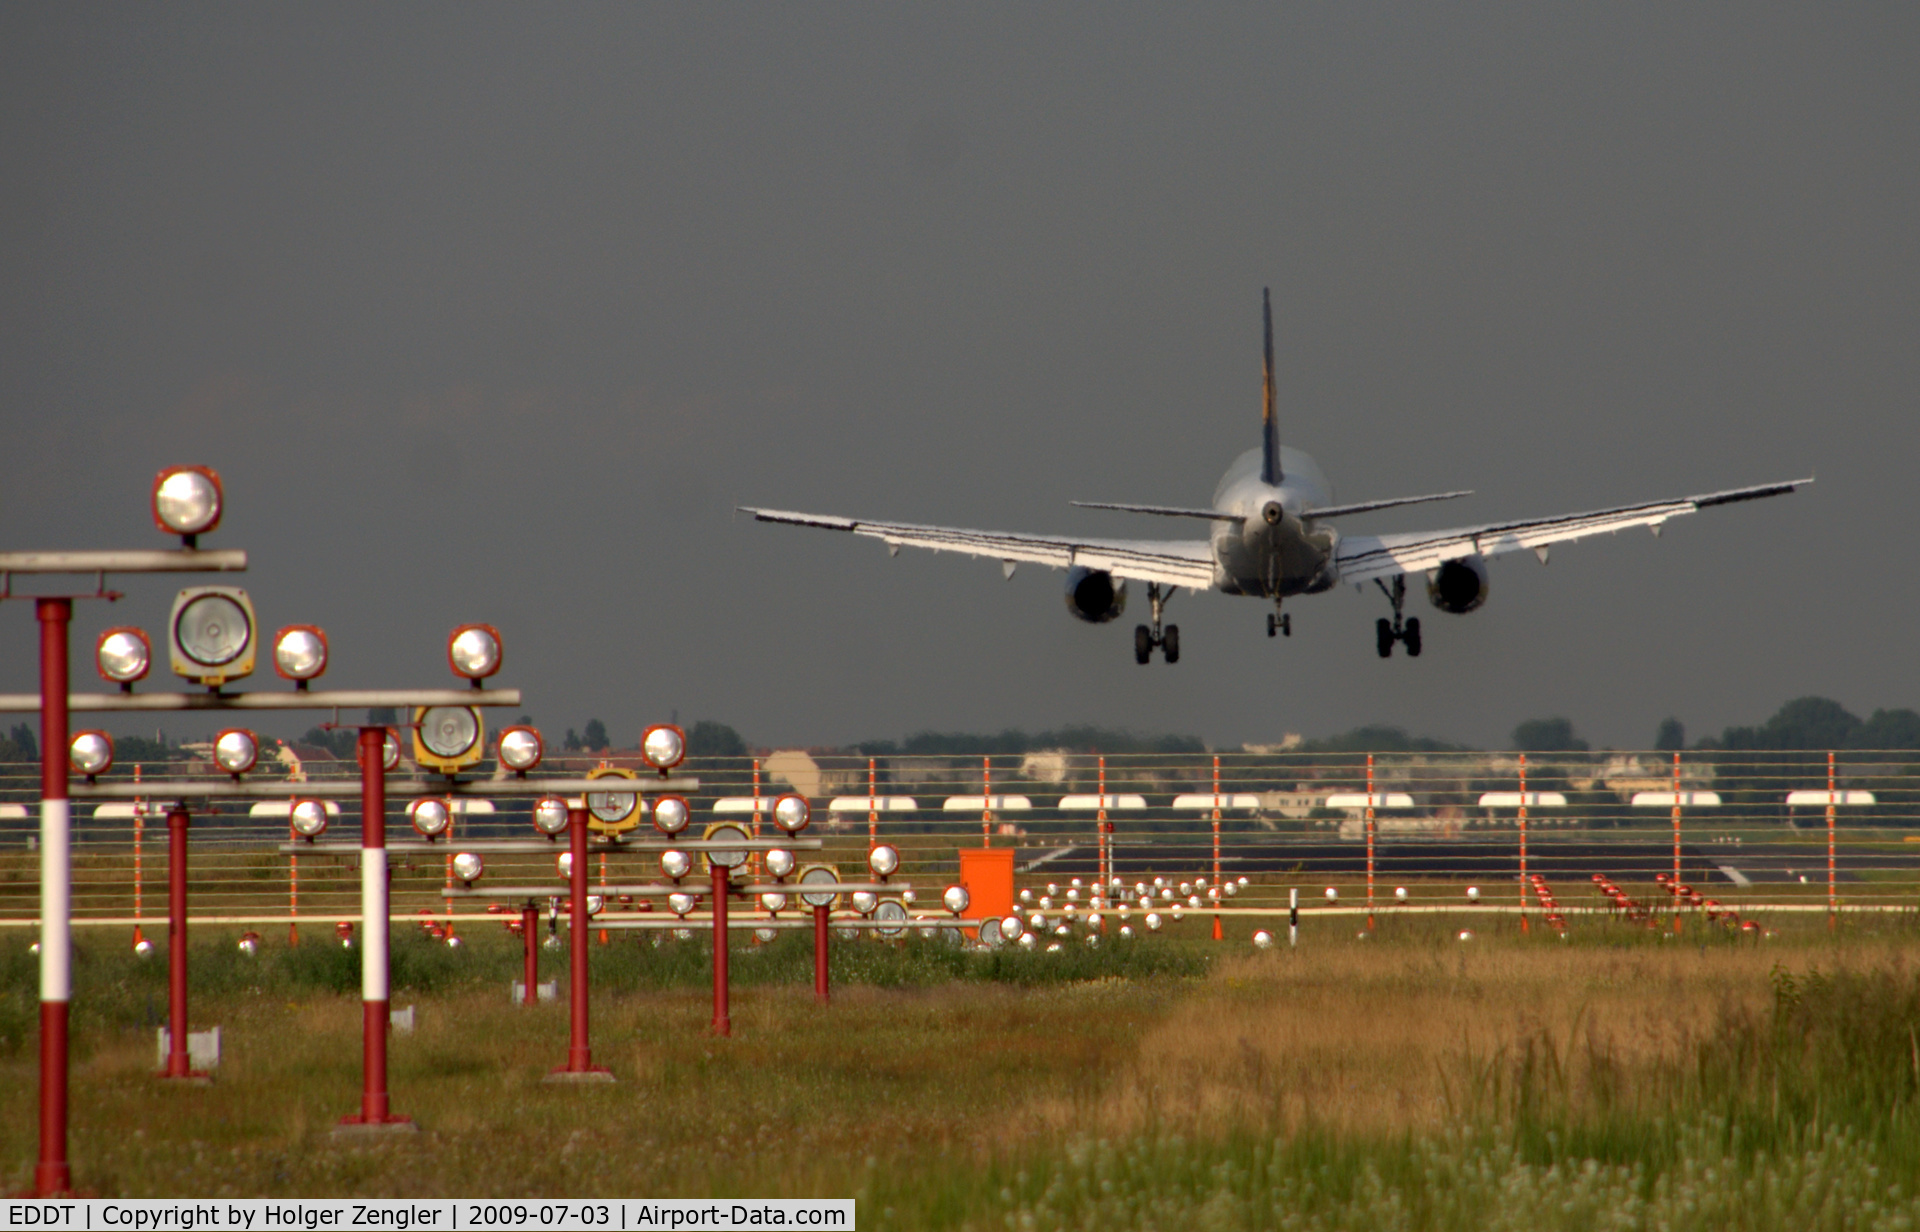 Tegel International Airport (closing in 2011), Berlin Germany (EDDT) - Touch down at runway 08 L in 2 seconds.